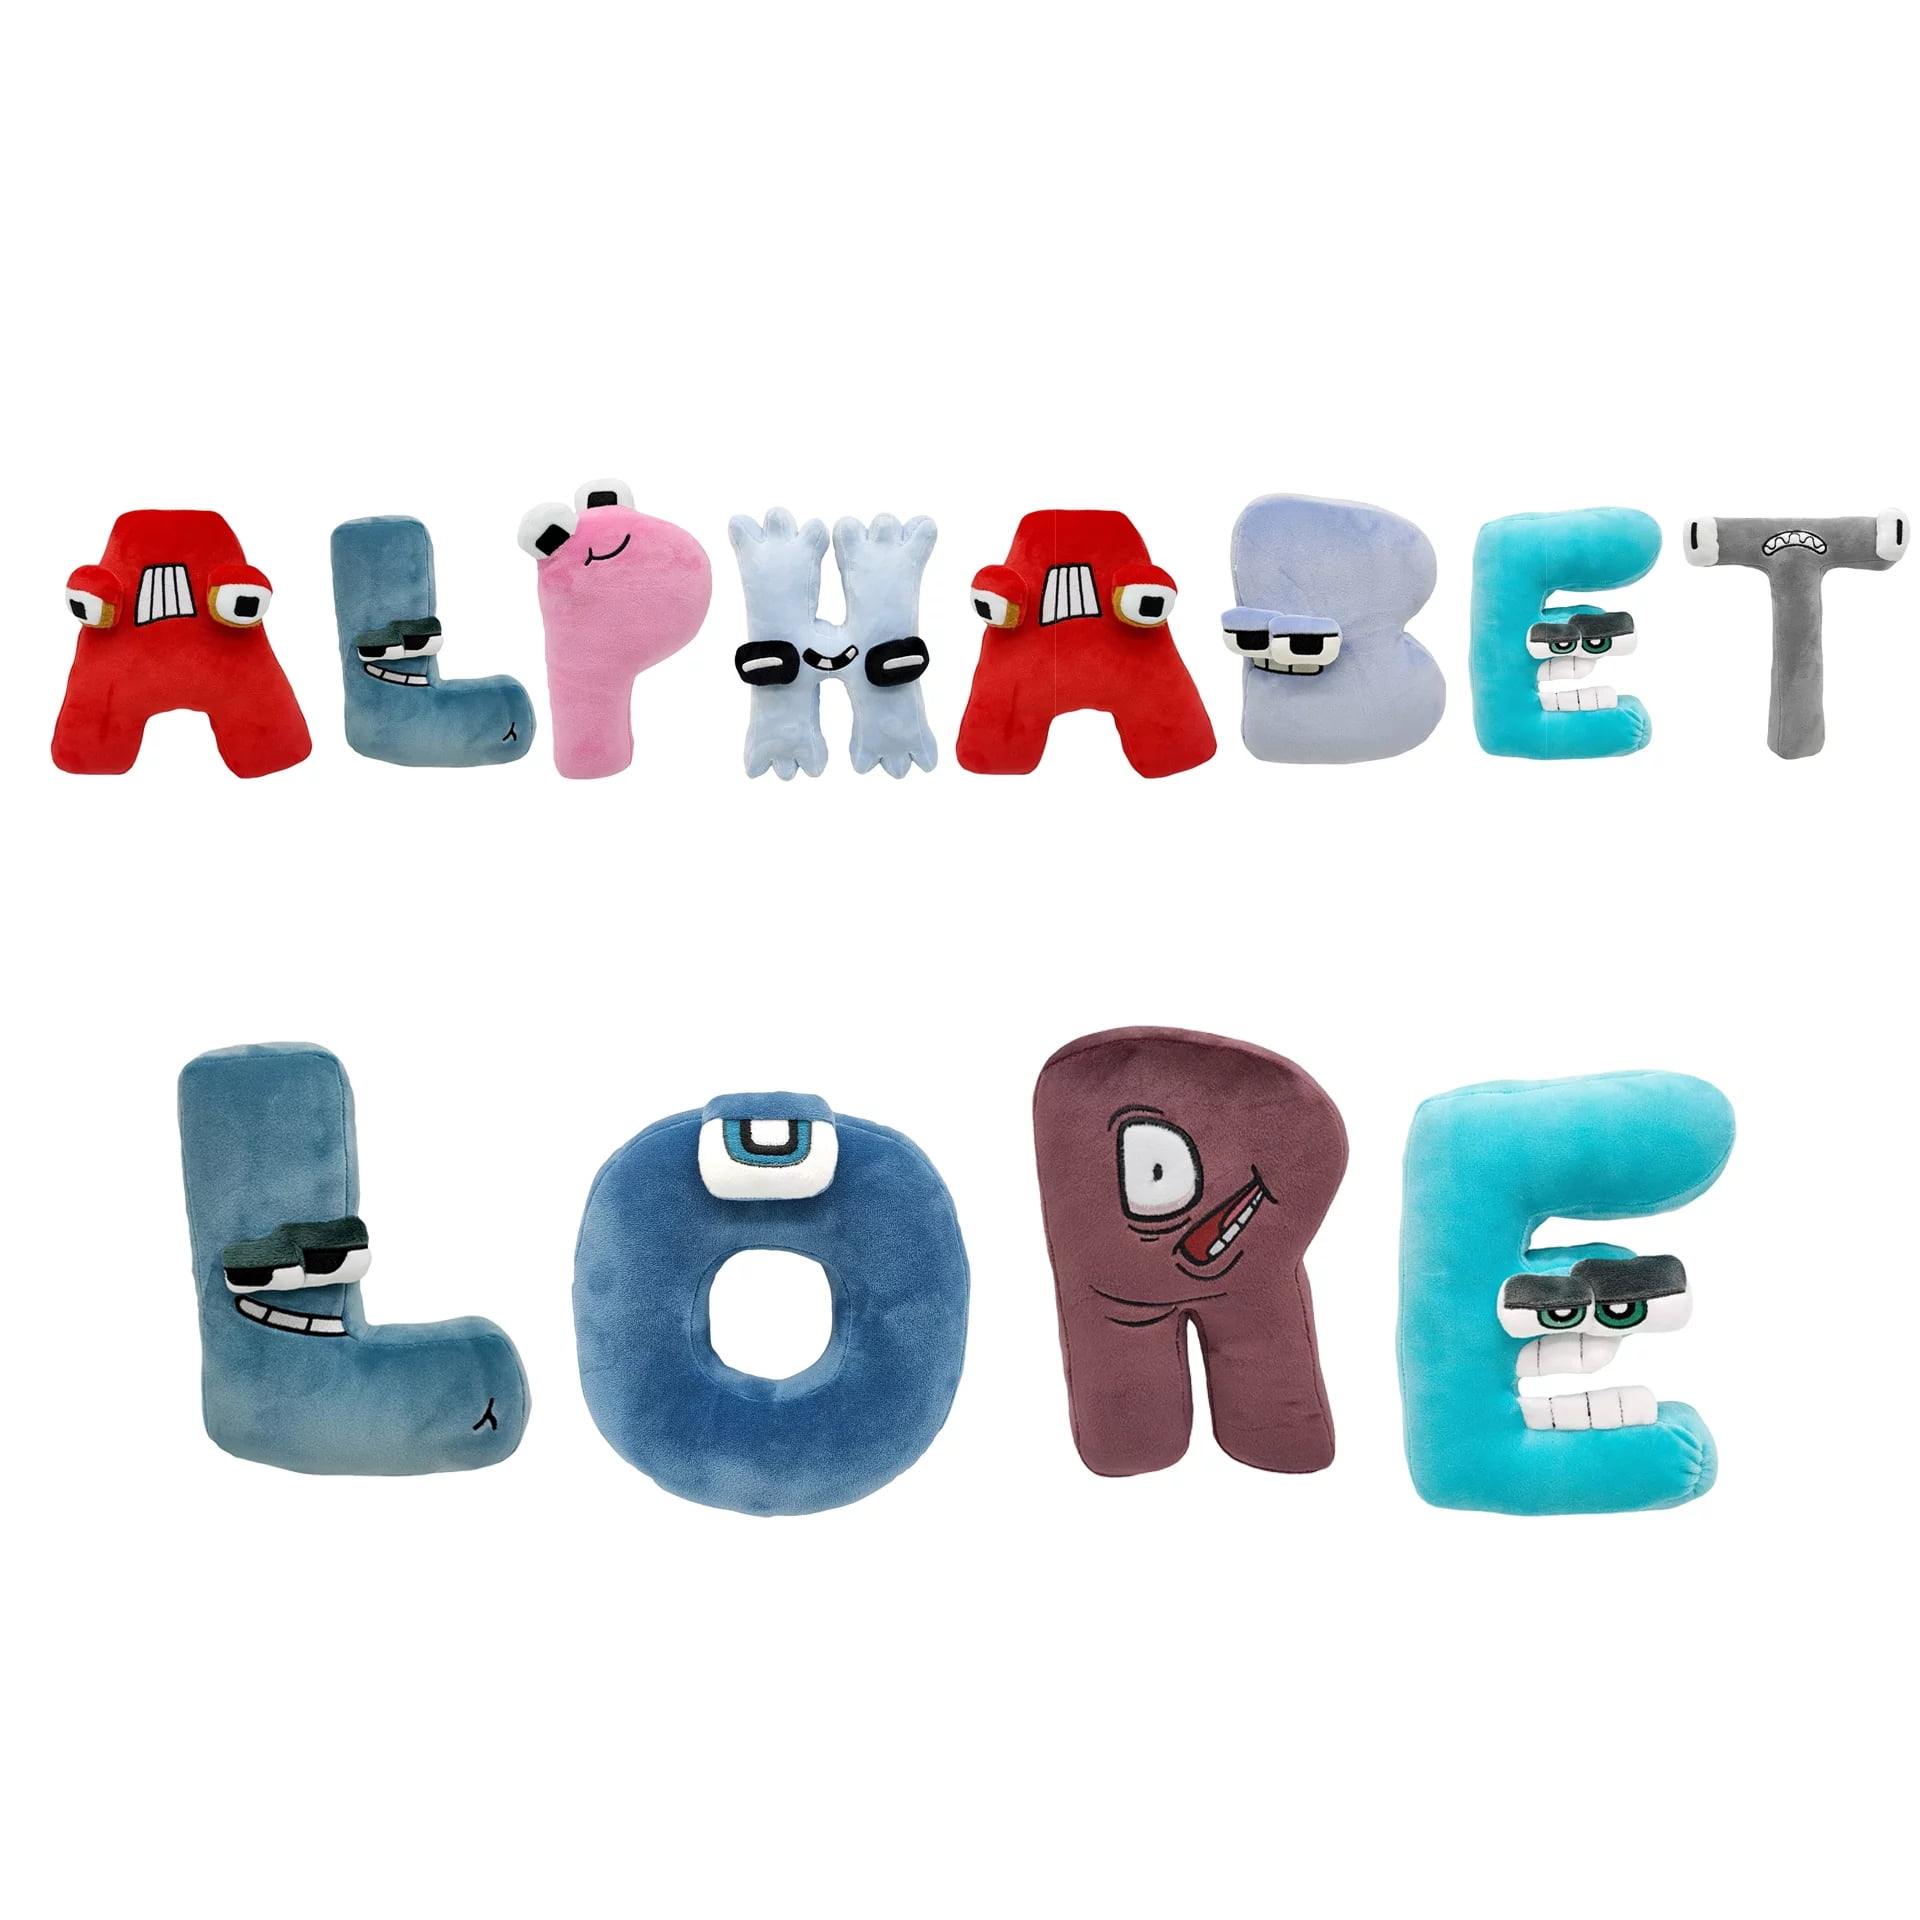 Alphabet Lore Plush,7.5-9.5In A J P I F C Plushies Toy for Fans Gift  Birthday Party Favor Preferred Gift for Holidays, Stuffed Figure Doll for  Boys